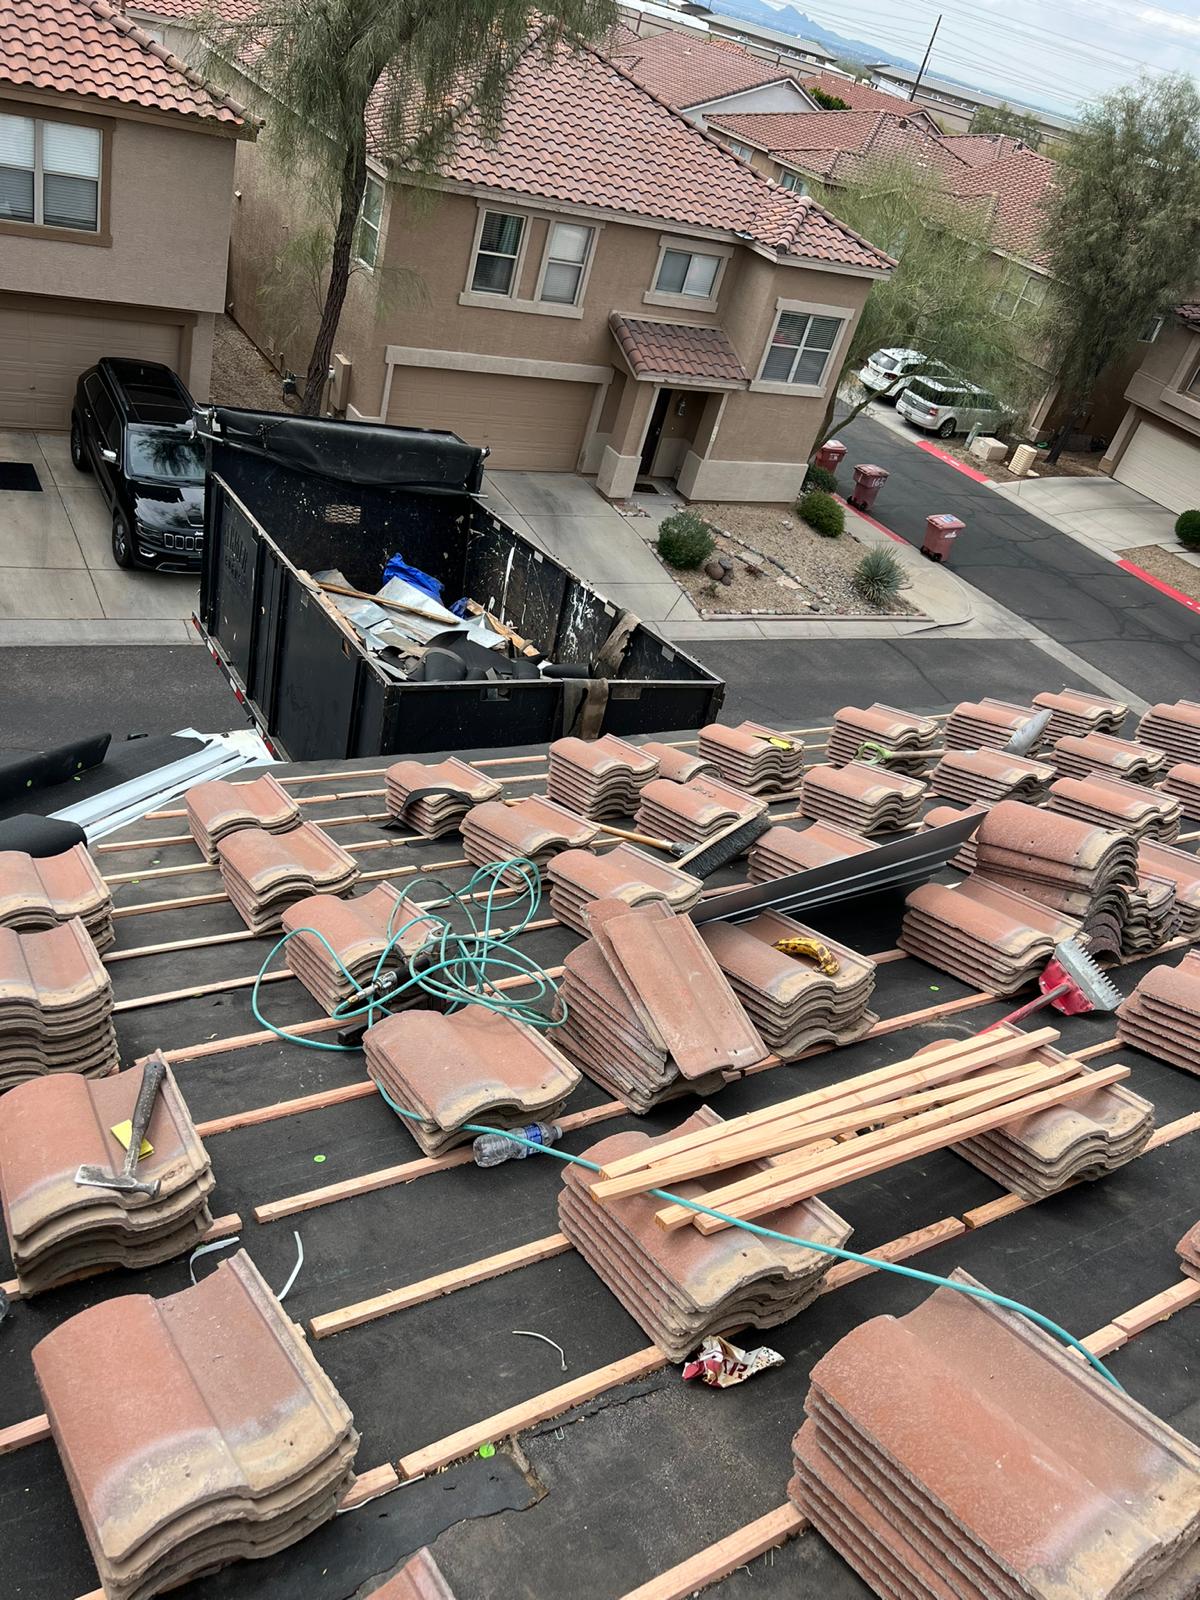 Organized stacks of tiles ready for re-felting by Behmer Roofing in Silverleaf, Scottsdale.